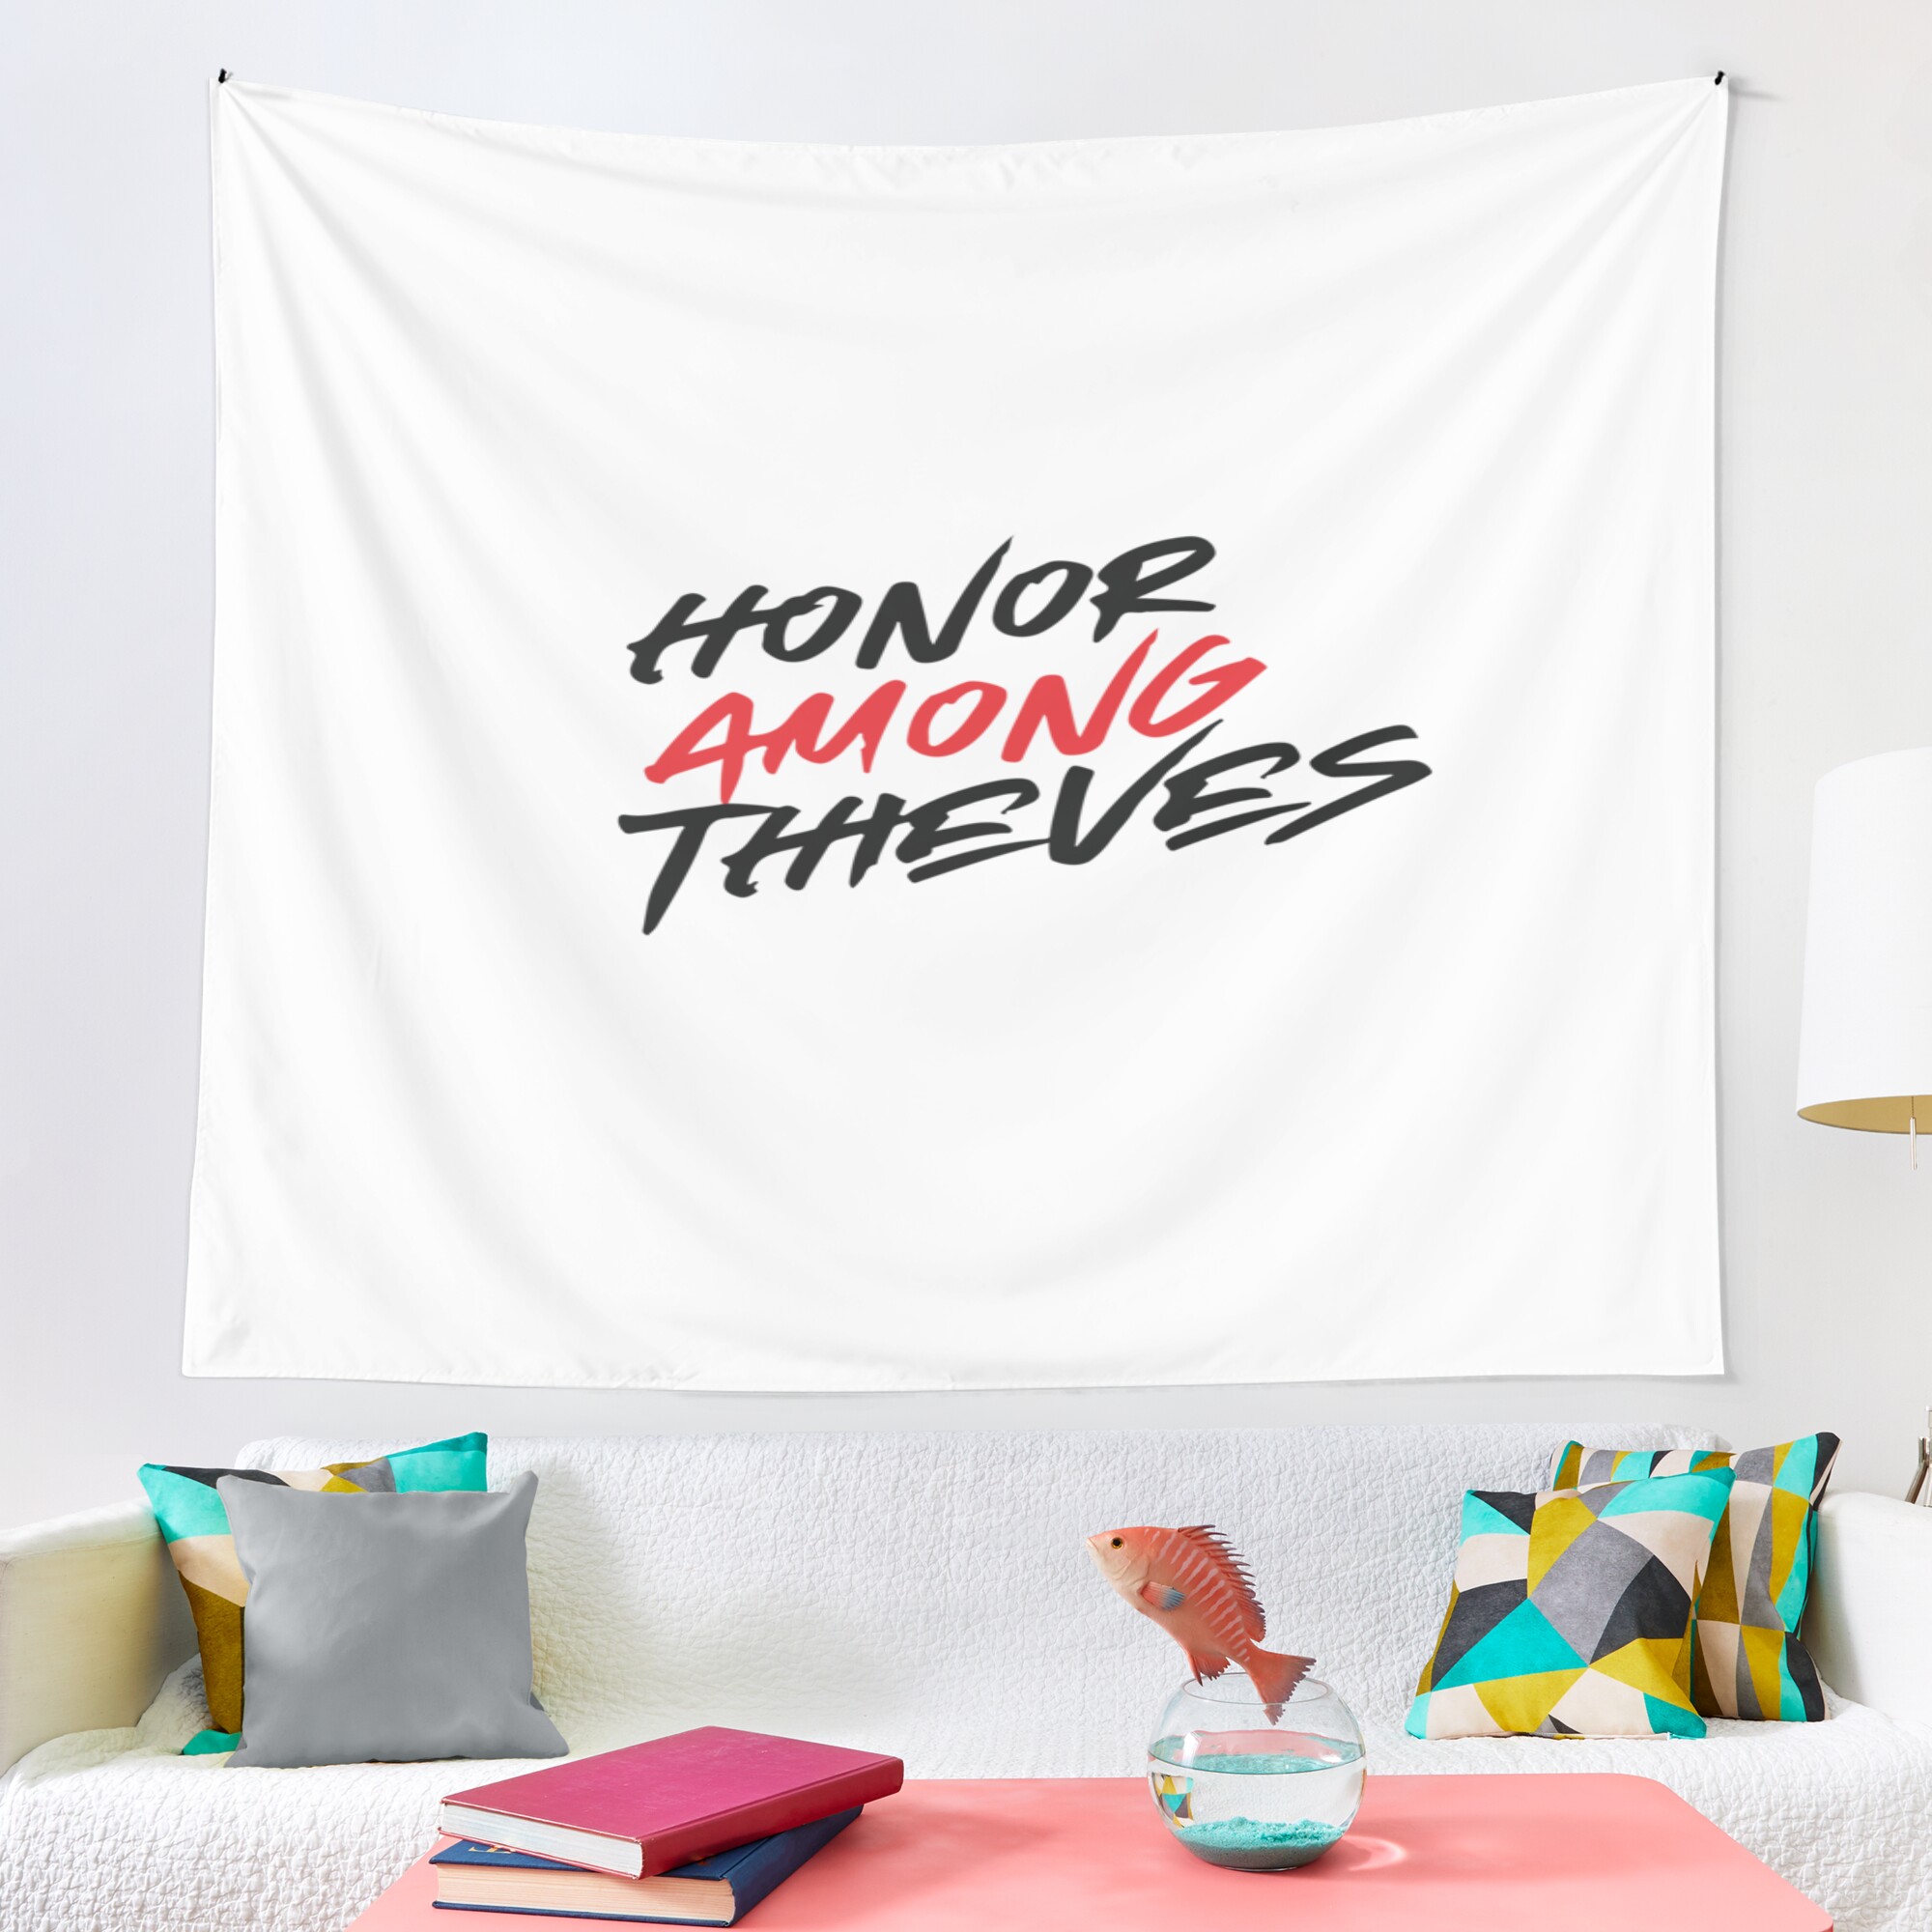 urtapestry lifestyle largesquare2000x2000 14 - 100 Thieves Shop